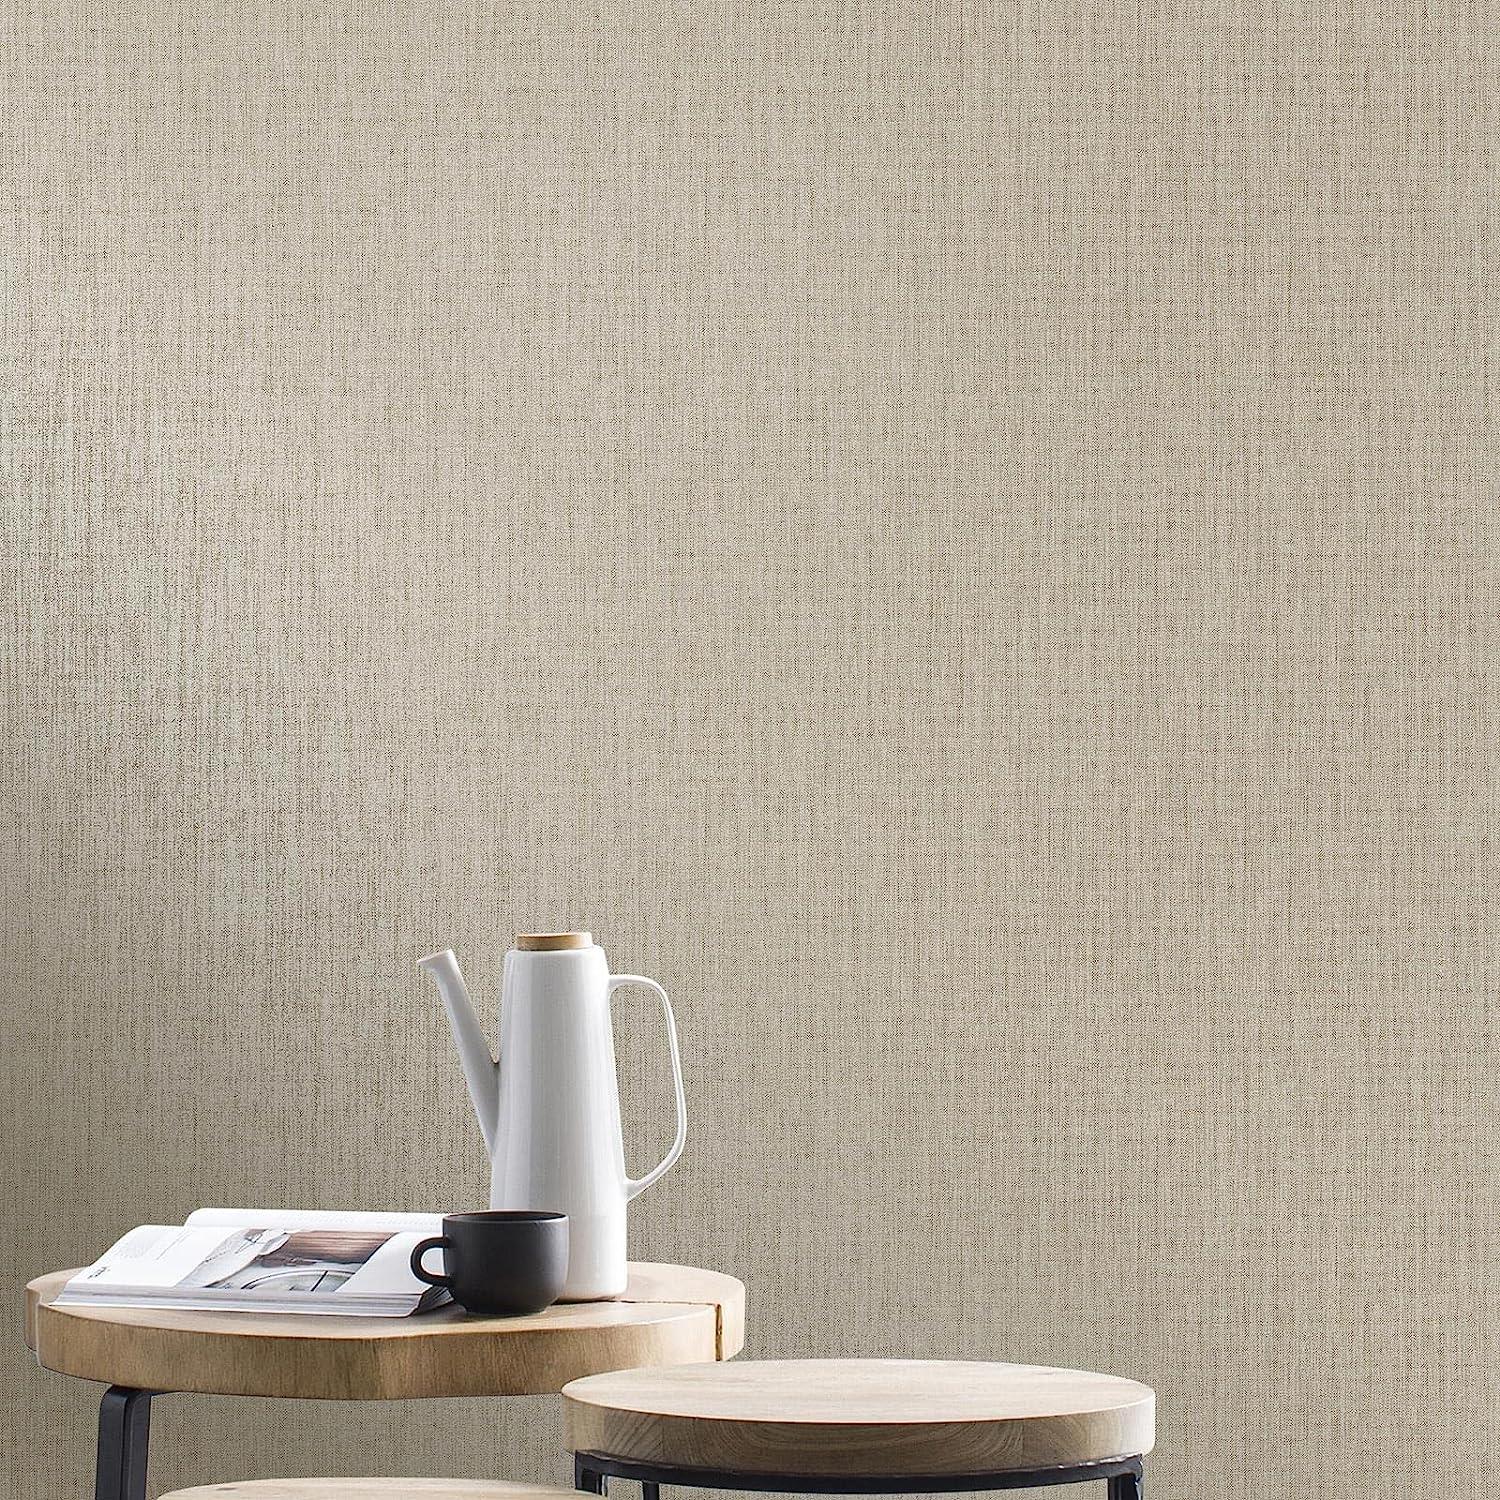 RASCH (U.K) Limited Amara Linen Wallpaper - Modern Wallpaper for Living Room, Bedroom, Fireplace - Decorative Luxury Wall Paper with Realistic Textile Thread Effect & Subtle Gold Glimmer (Beige)